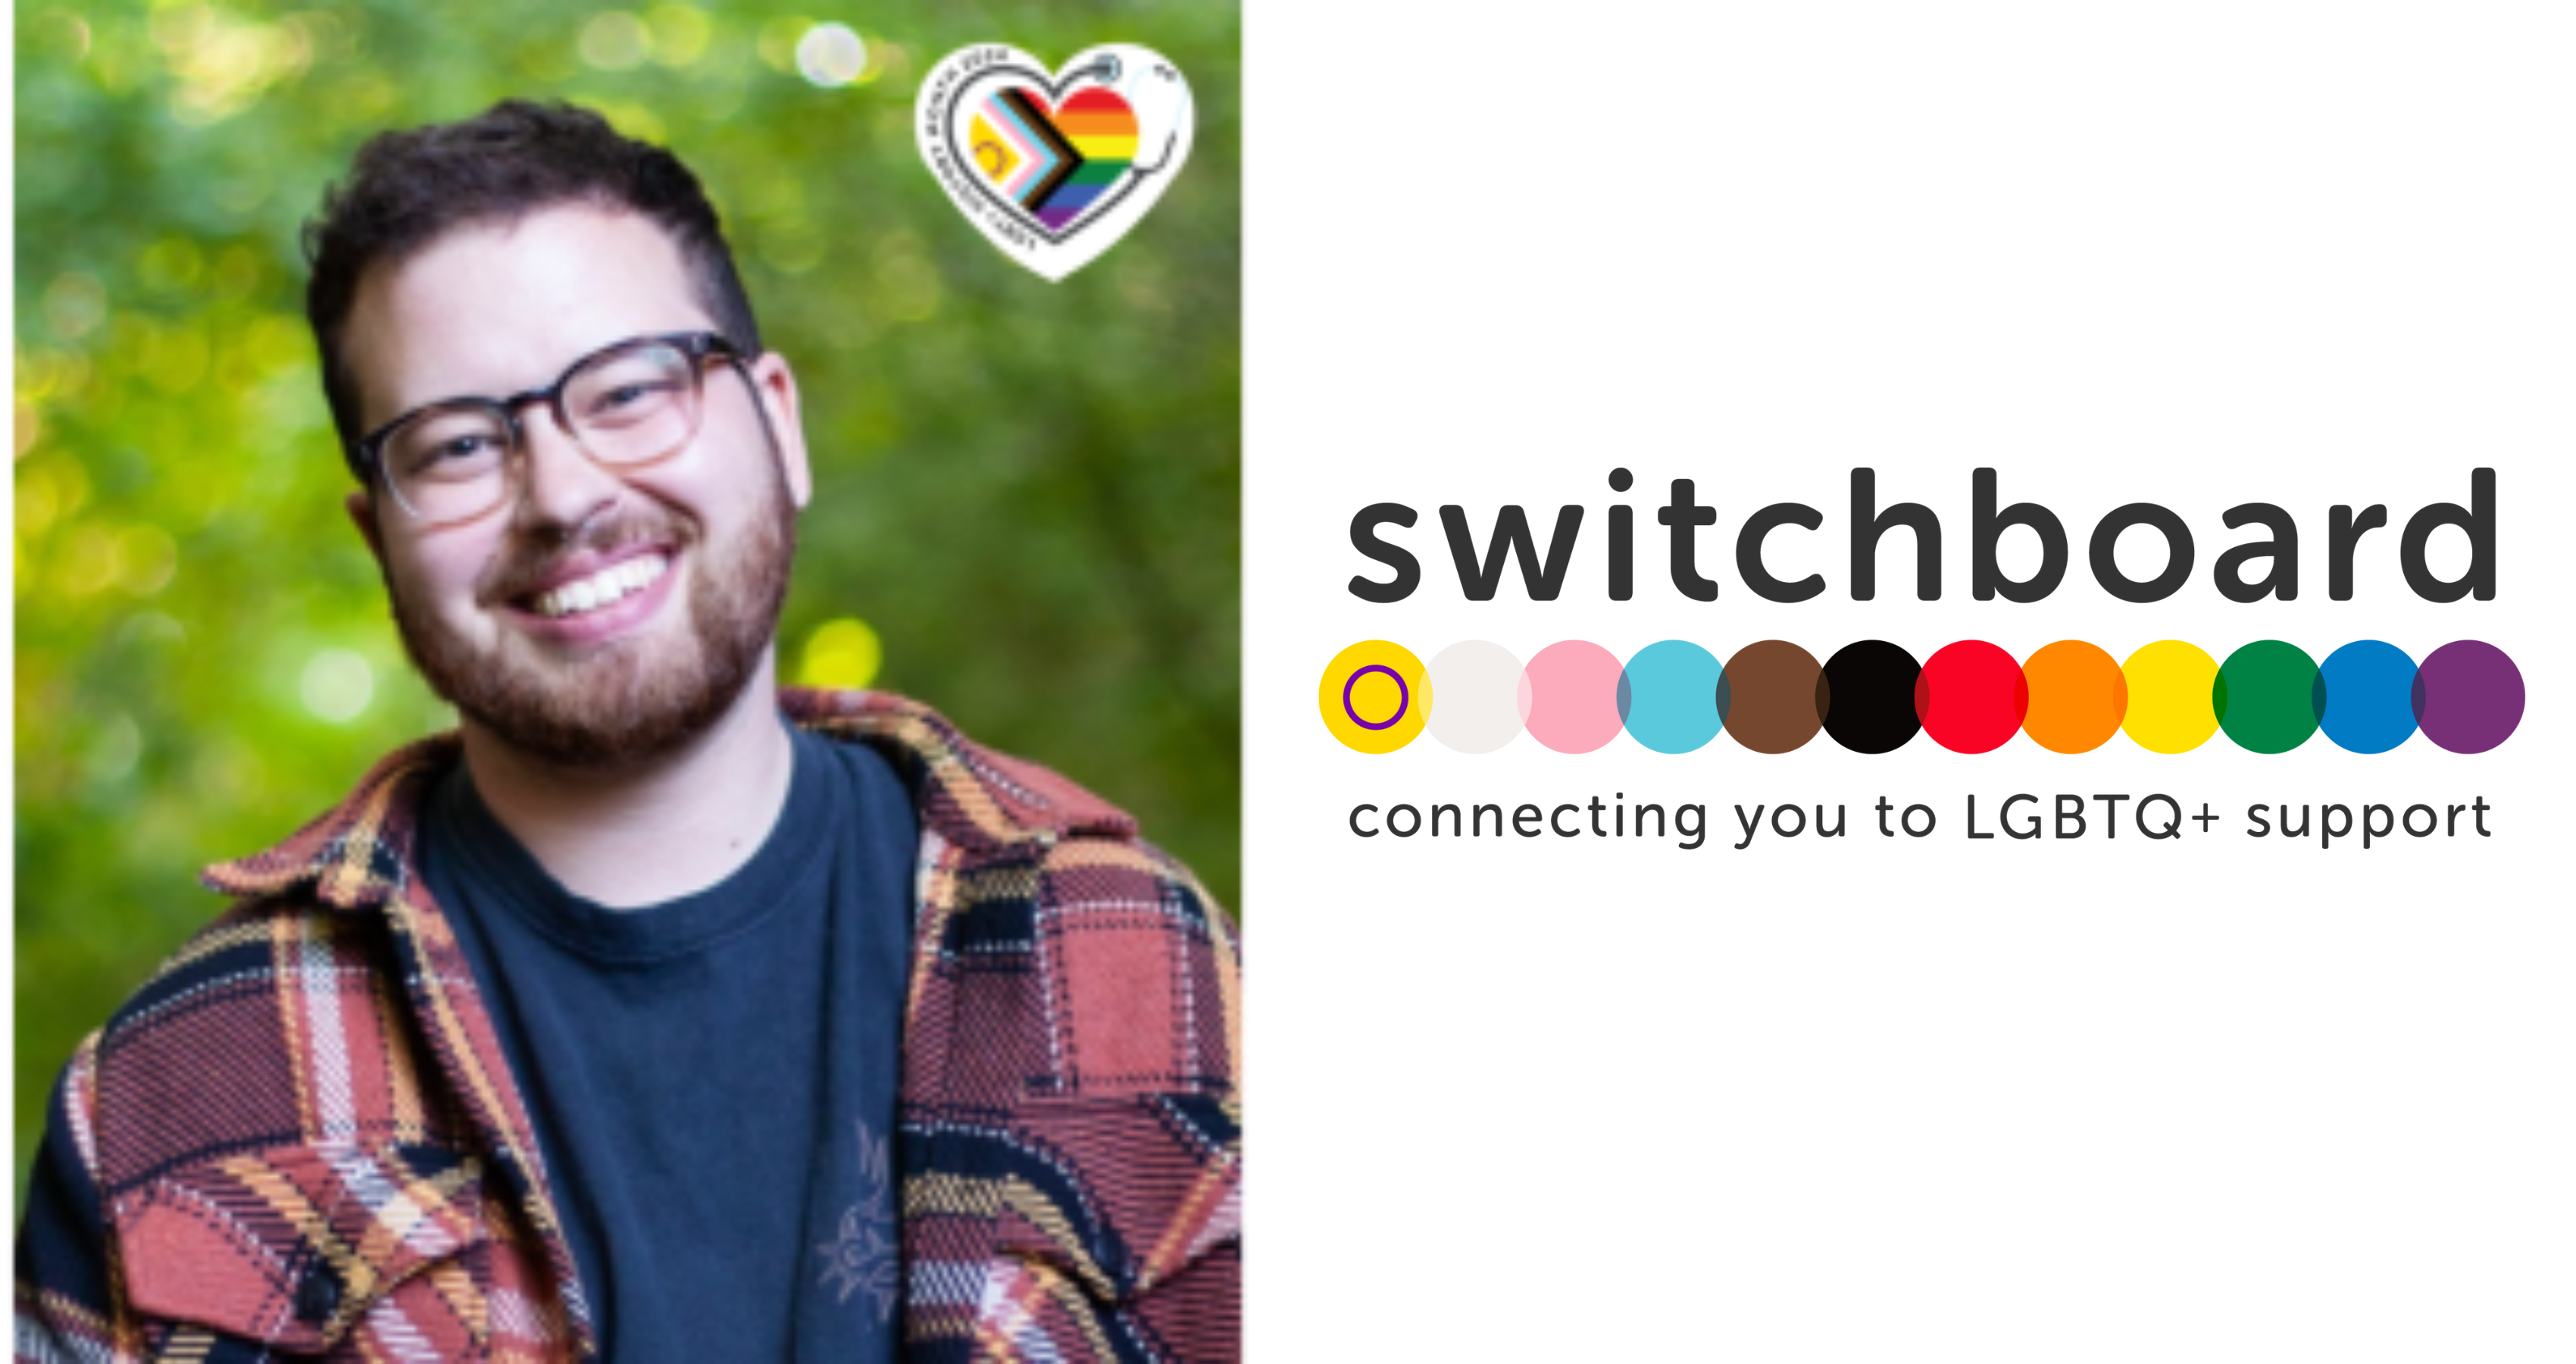 LGBT+ History Month: Switchboard Interview with Reuben, Social Prescriberimage